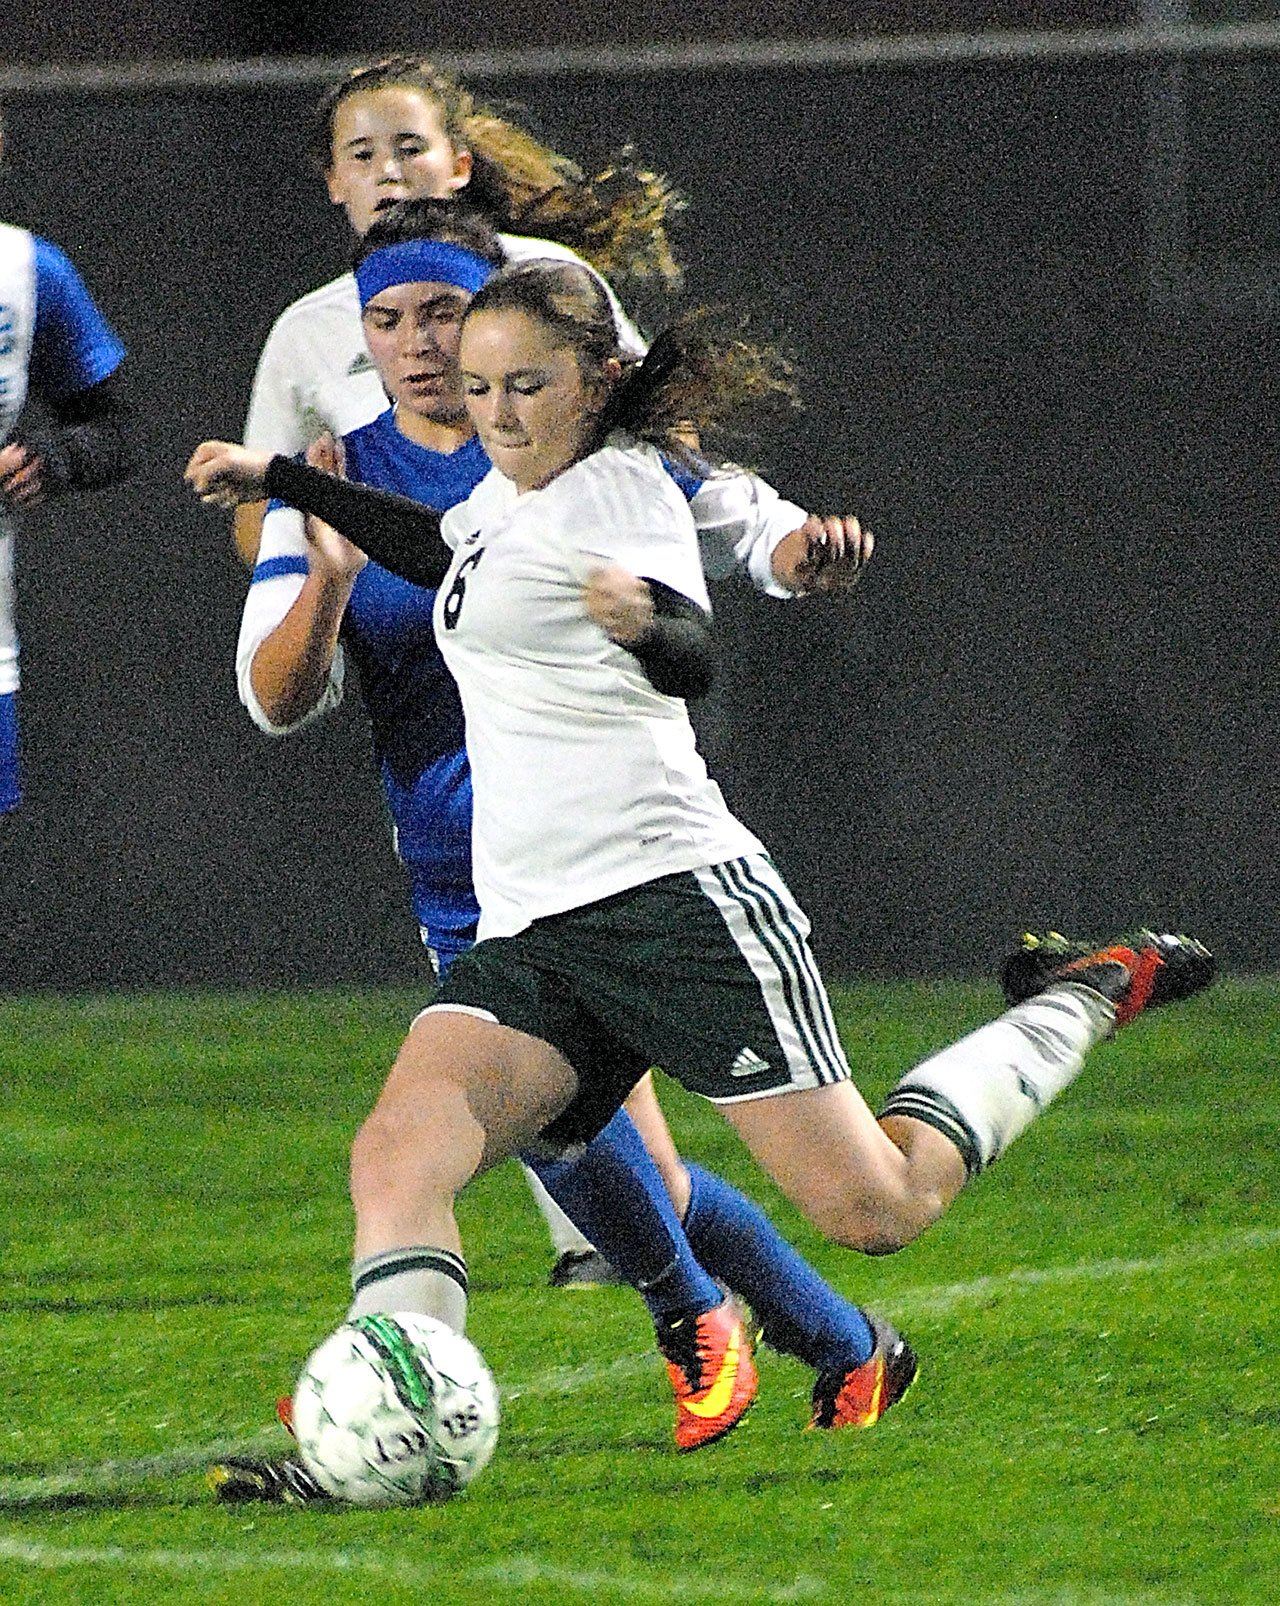 Keith Thorpe/Peninsula Daily News Port Angeles’ Emily Boyd, front, slips past the defense of North Mason’s Abby Leibold as teammate Delany Wenzel, back, looks on at Civic Field in Port Angeles.